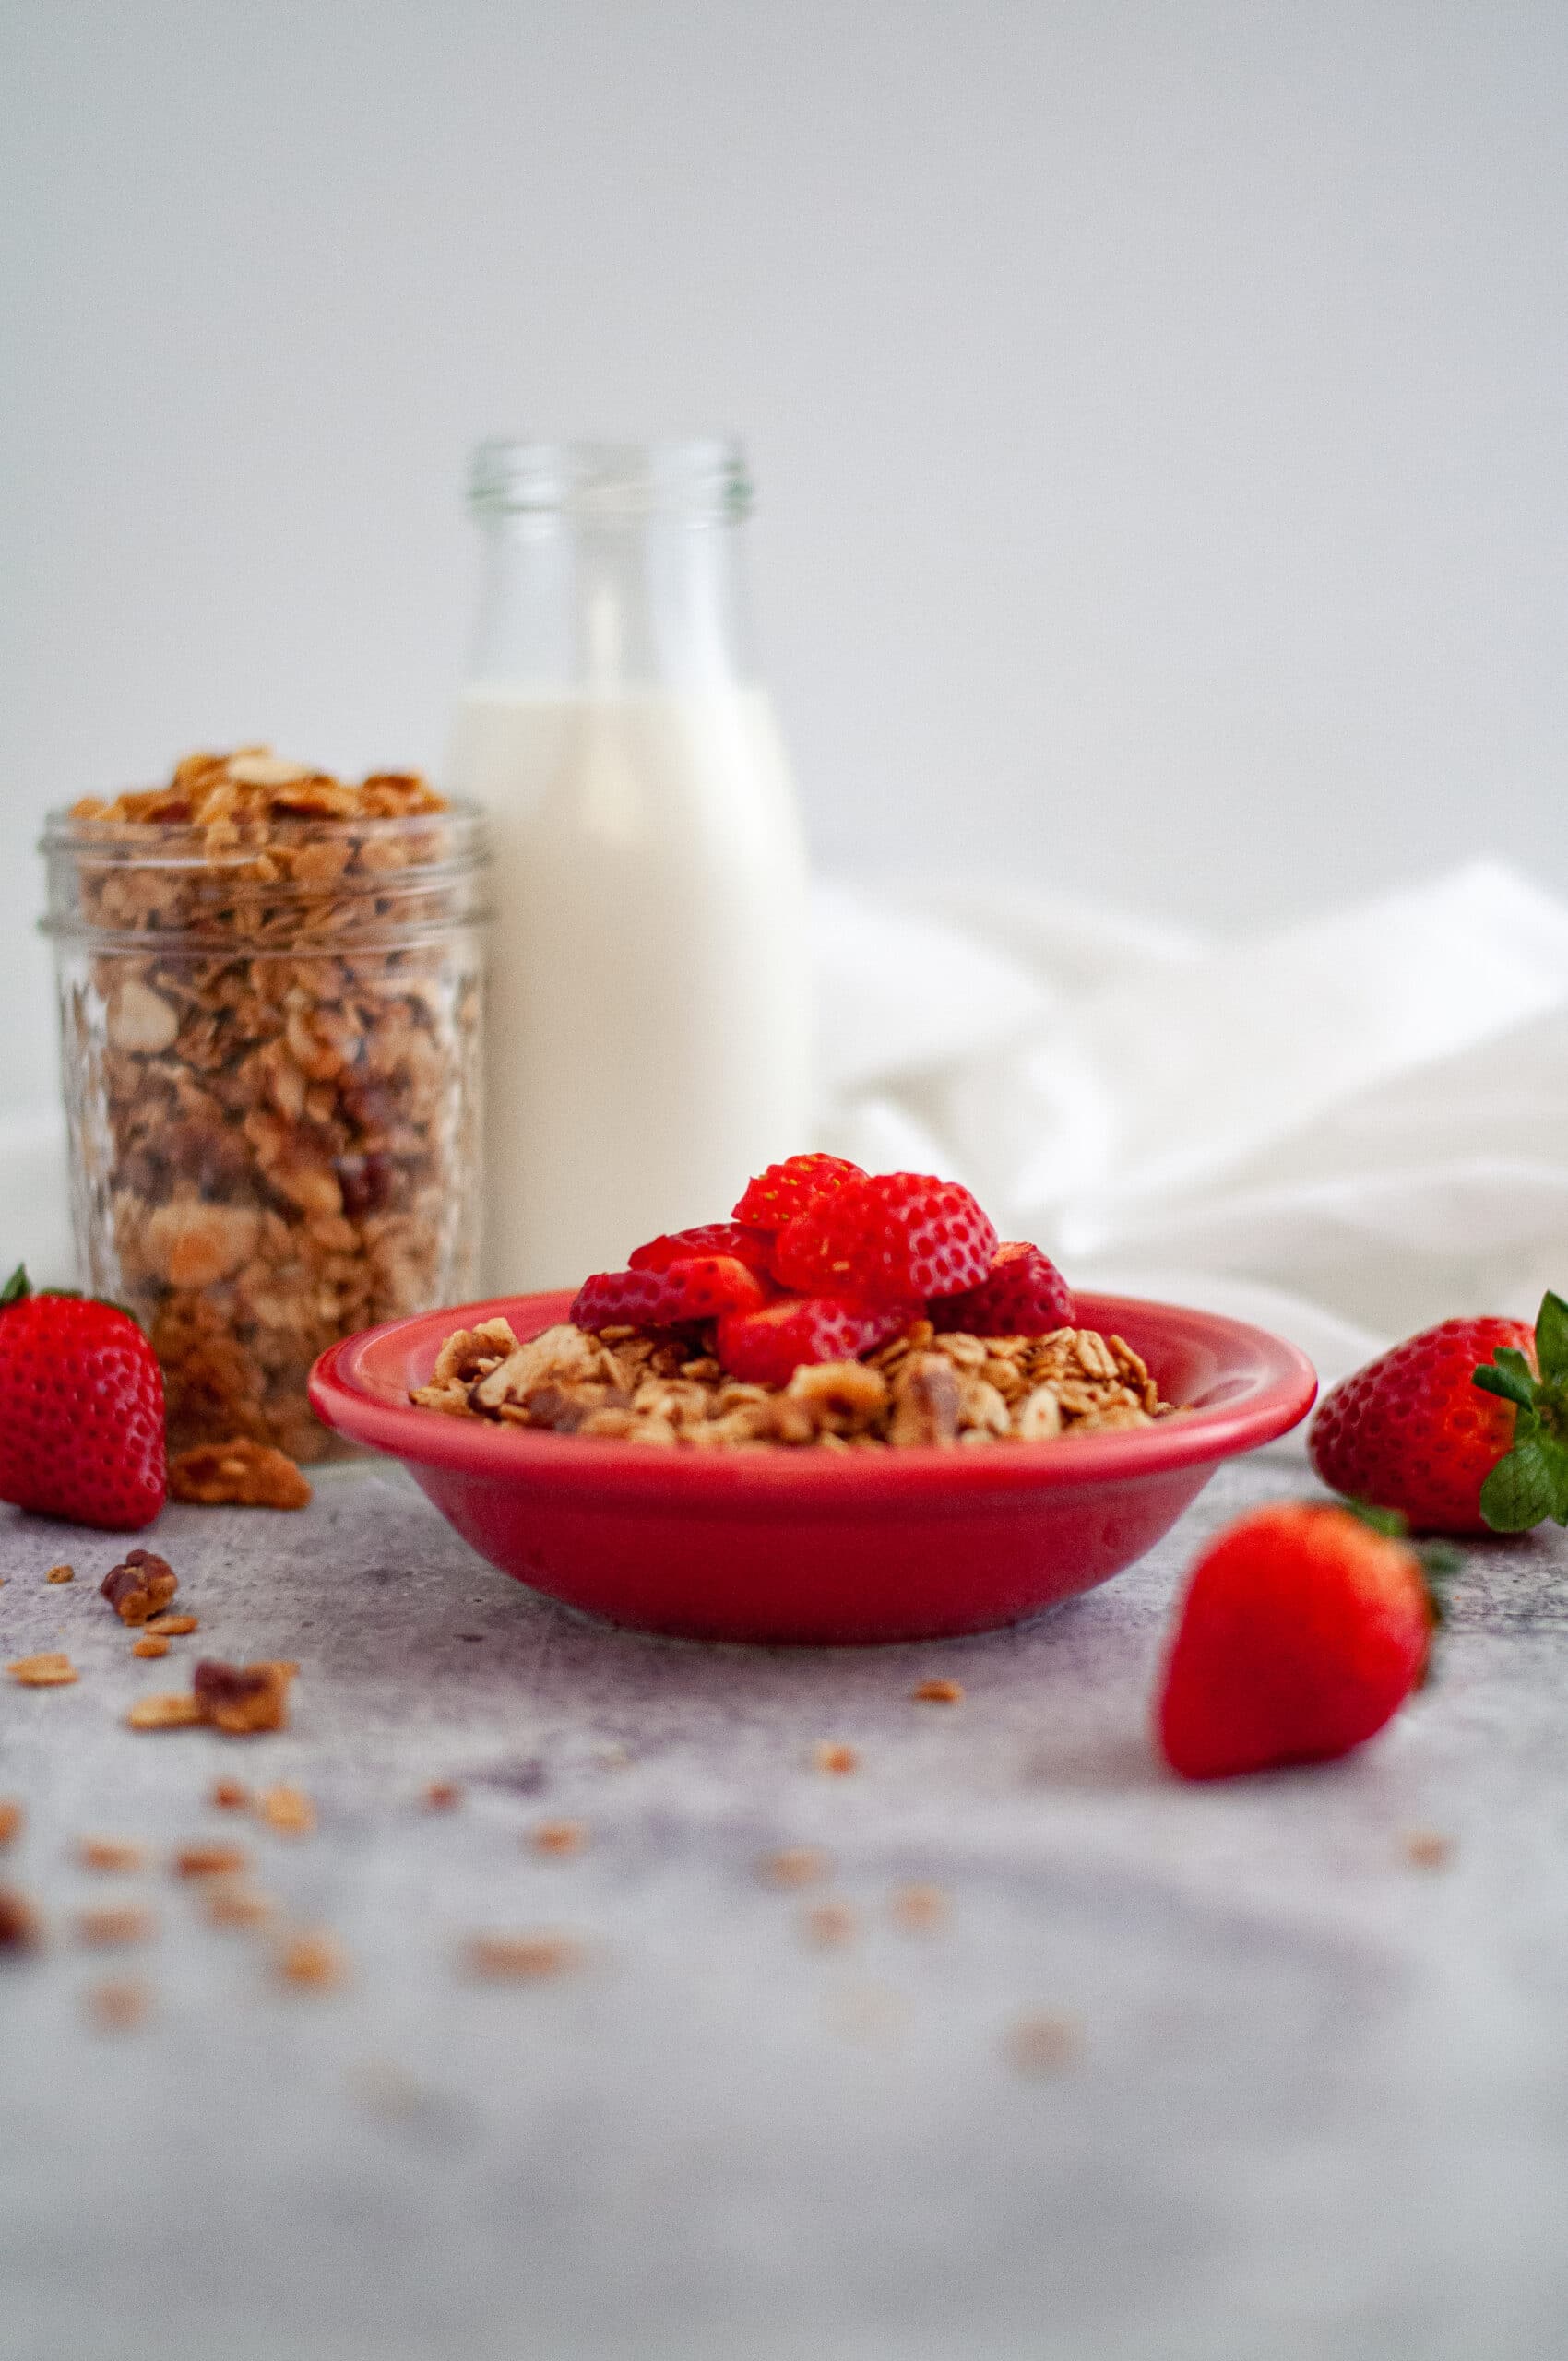 Small red bowl of granola topped with slices of strawberries. This homemade granola is surrounded by strawberries, granola in a small glass jar as well as scattered around, and a glass jar of milk